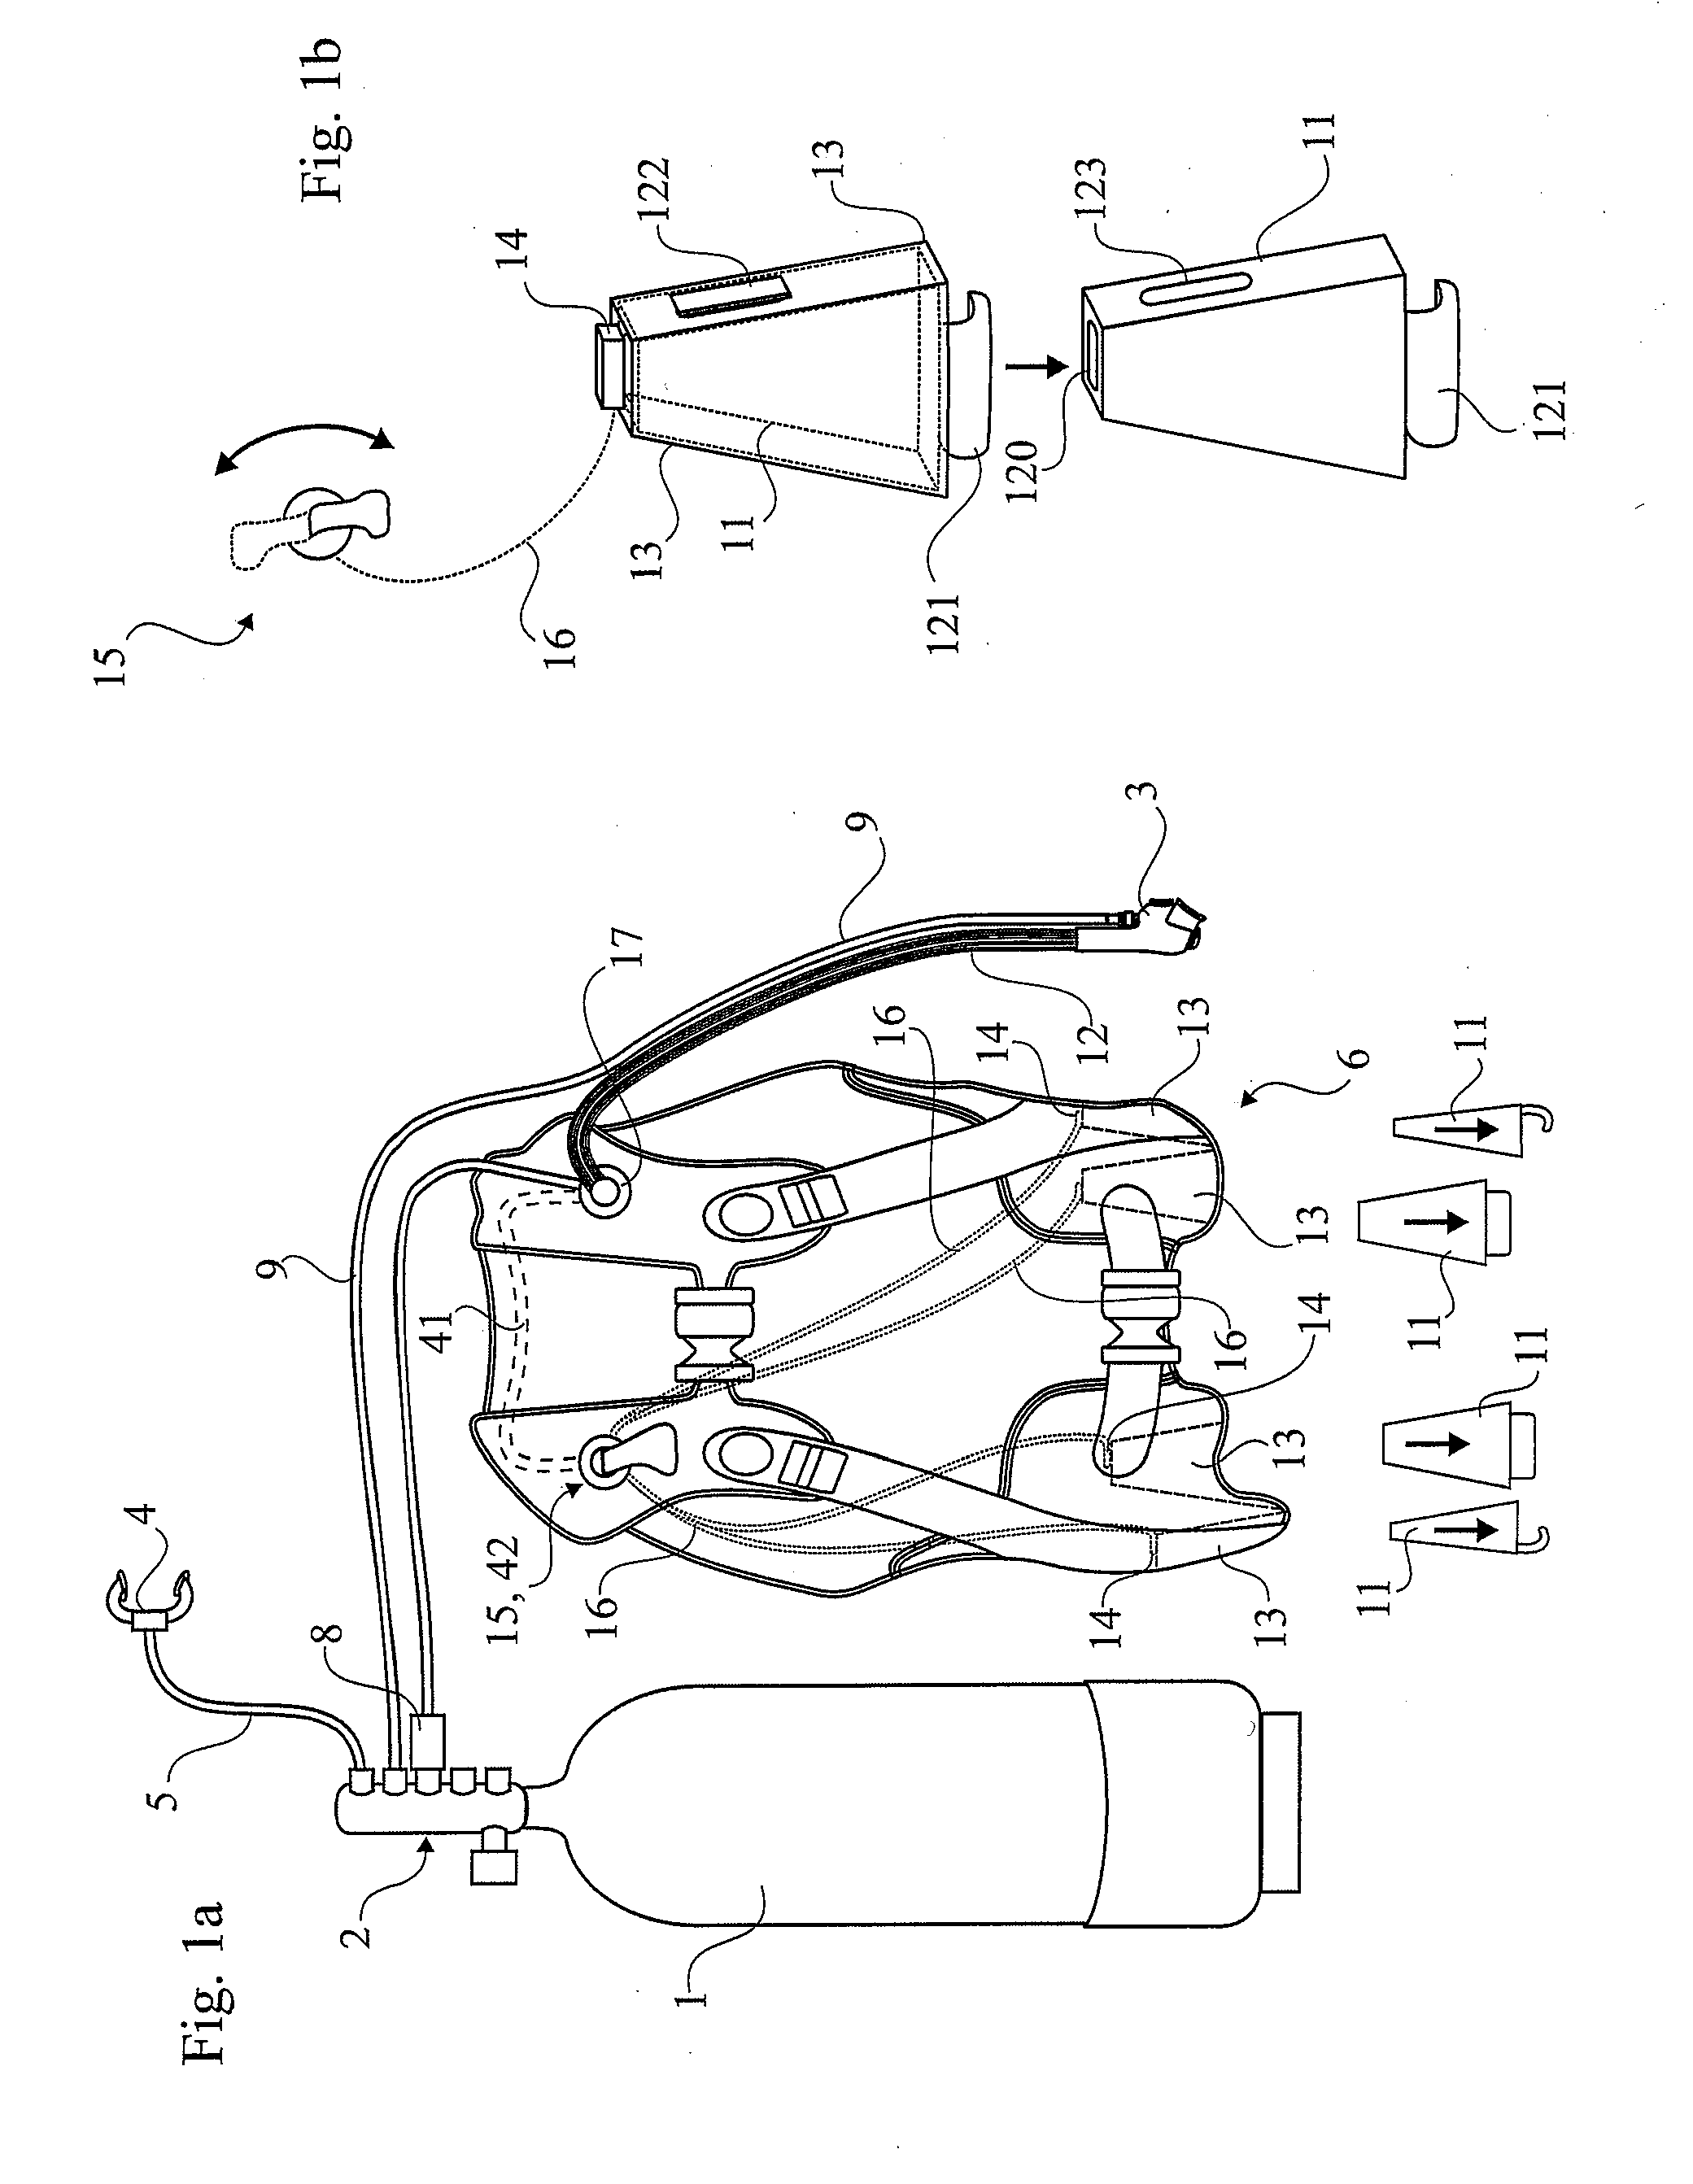 Safety device and method for scuba-diving